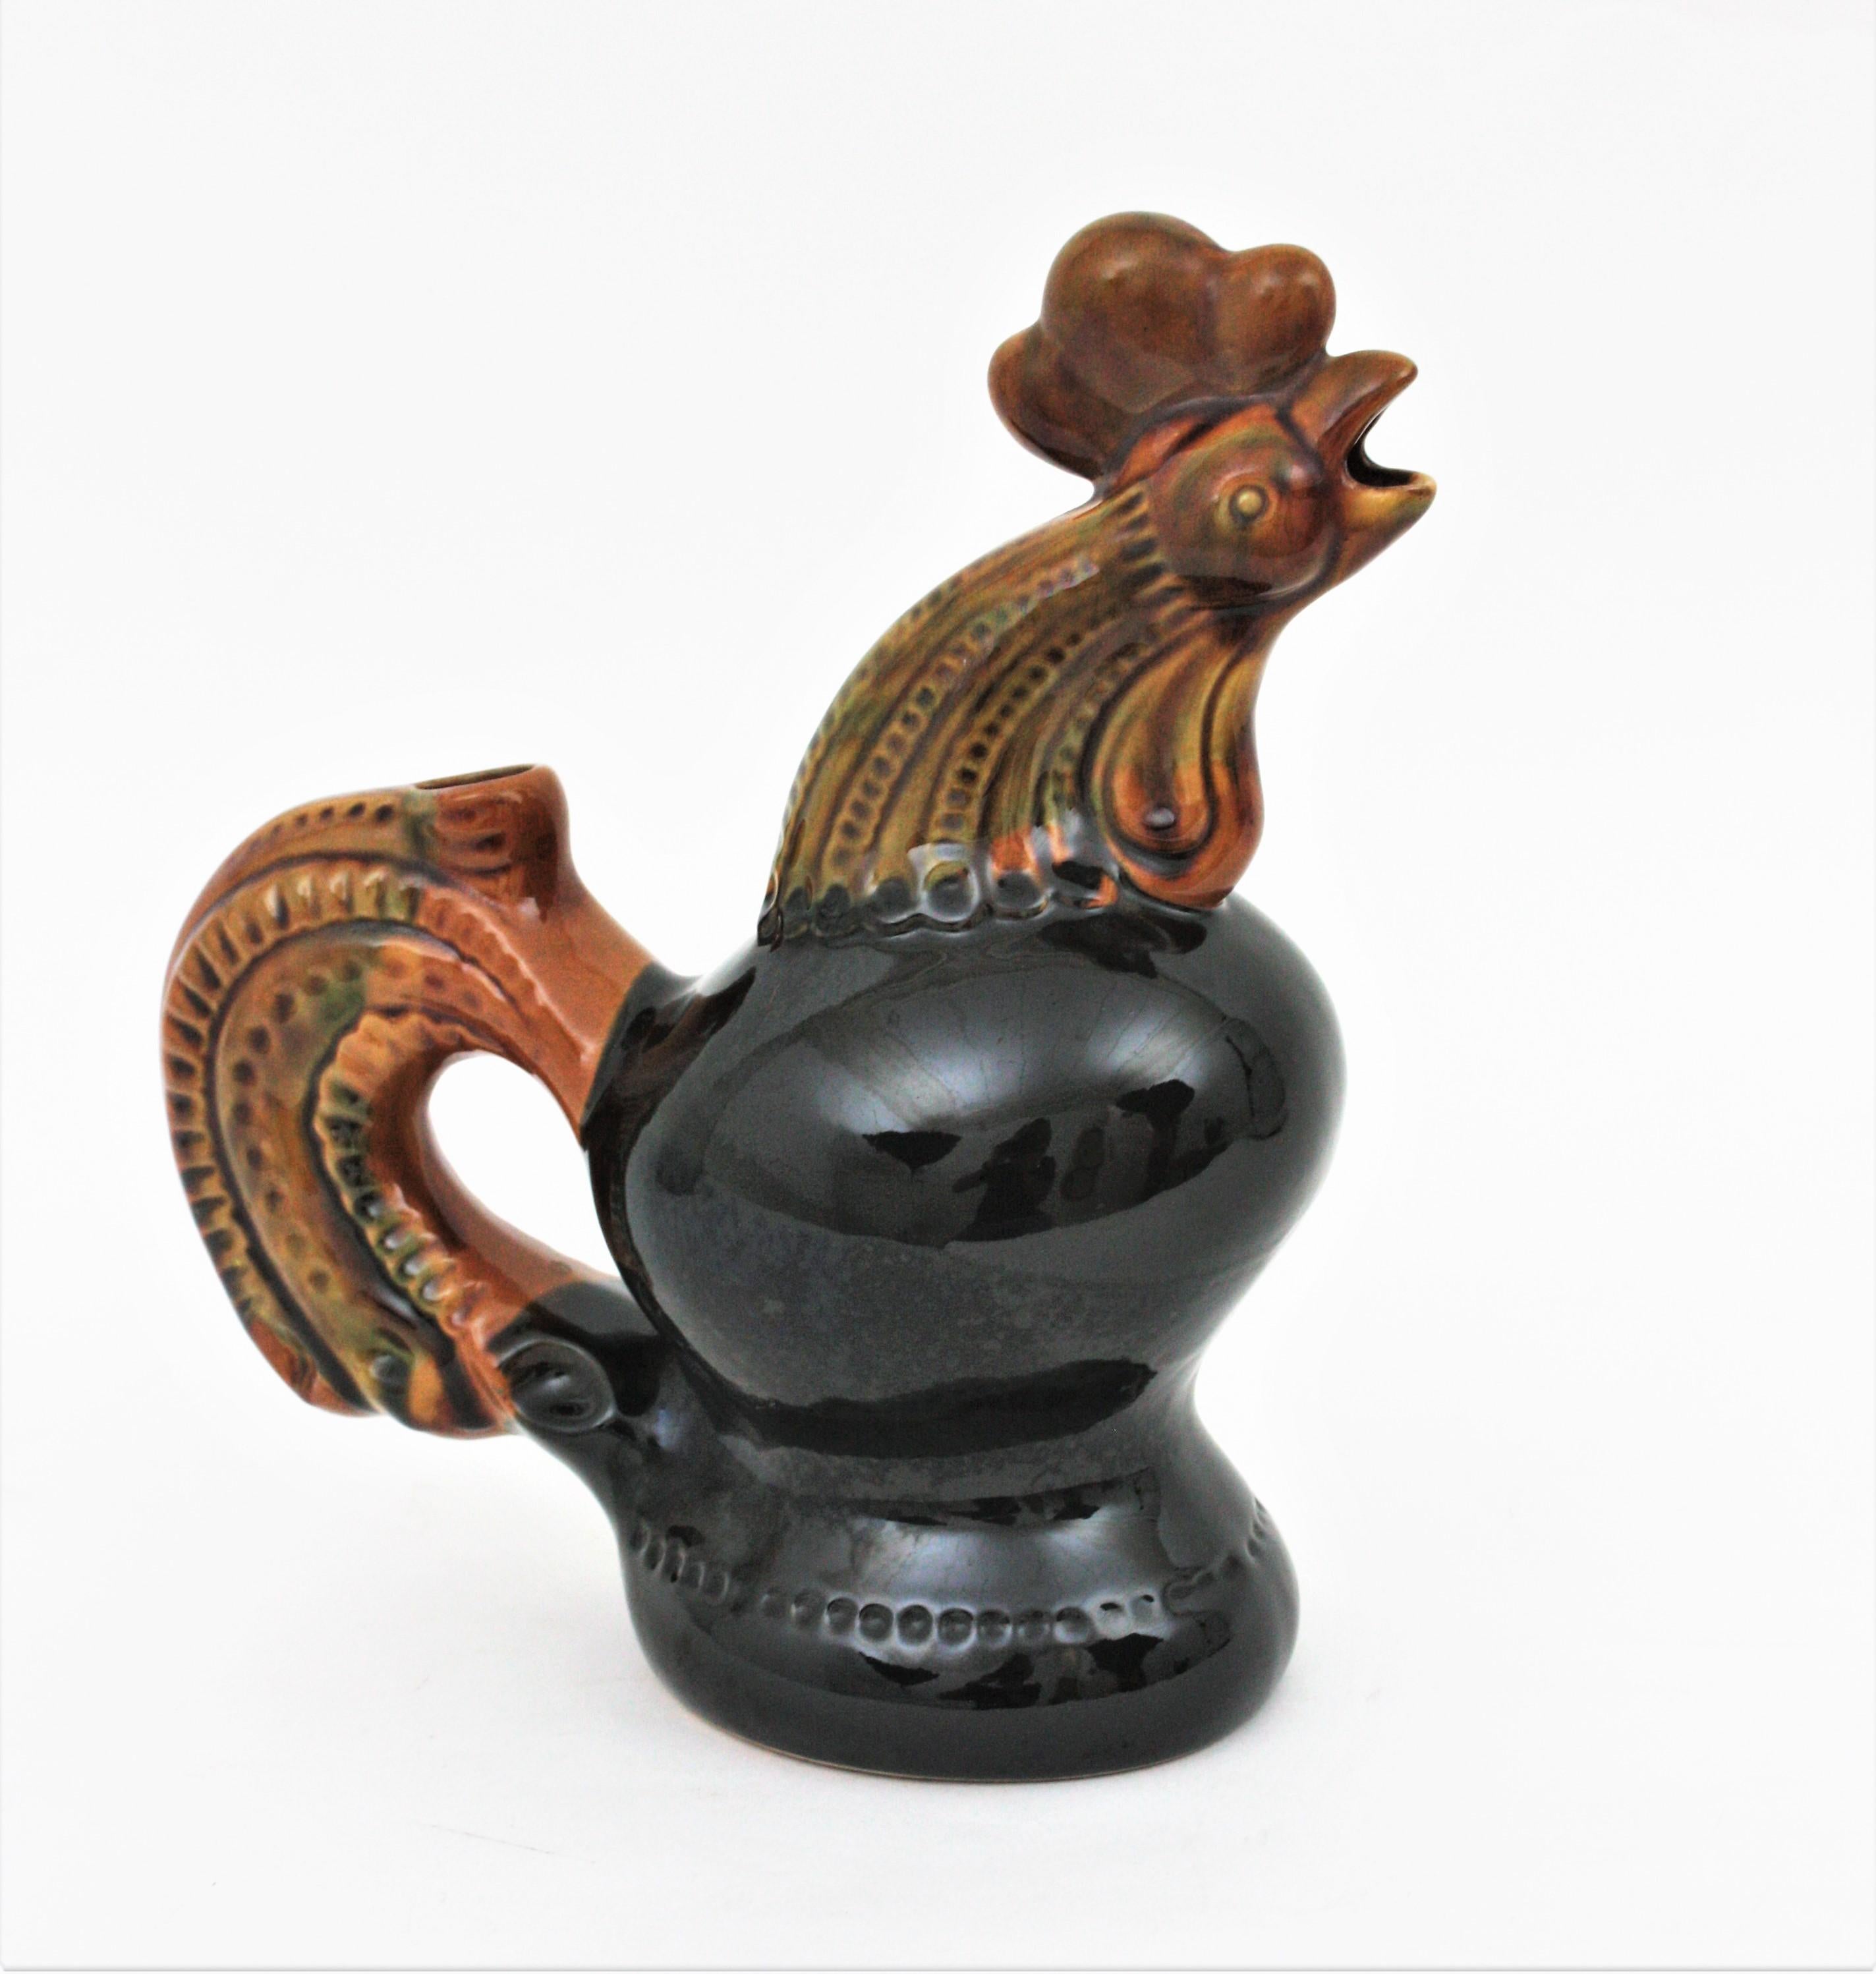 Eye-catching black and amber Majolica ceramic rooster jug / pitcher, Ukraine, 1950s-1960s.
A cool accent to any kitchen or to be user as serving pitcher. Lovely as a part of a ceramics collection displayed in a cabinet.
Mint condition.
Measures: 27